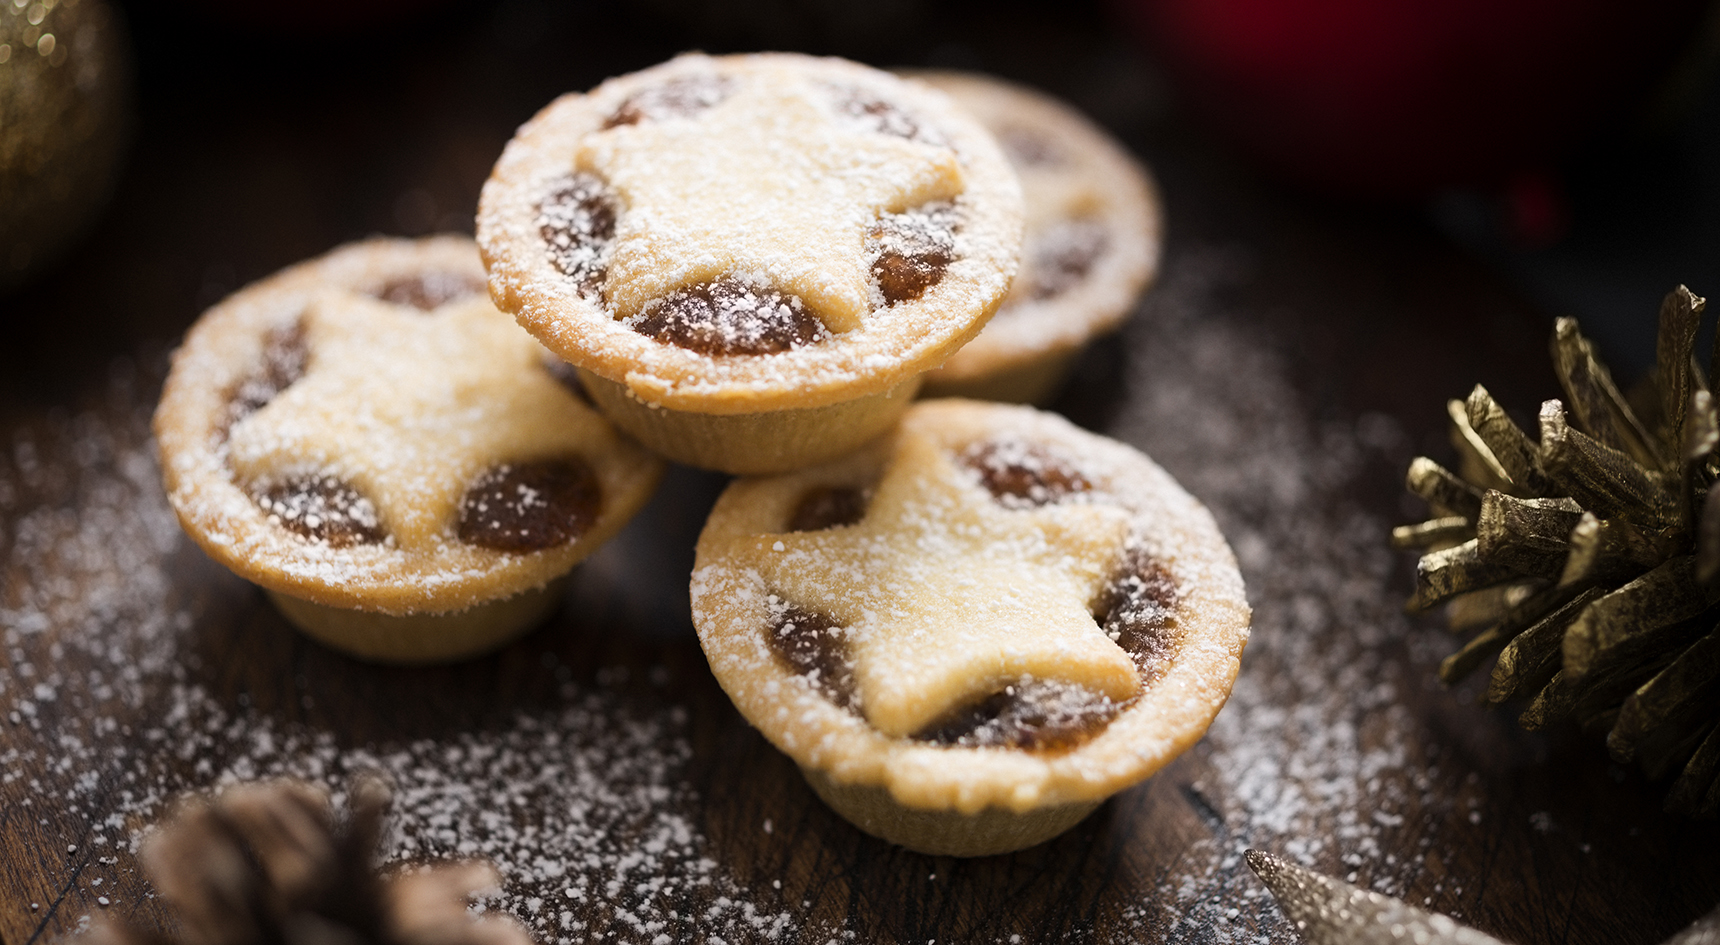 Three small mince pies, dusted with icing sugar with Christmas decorations.